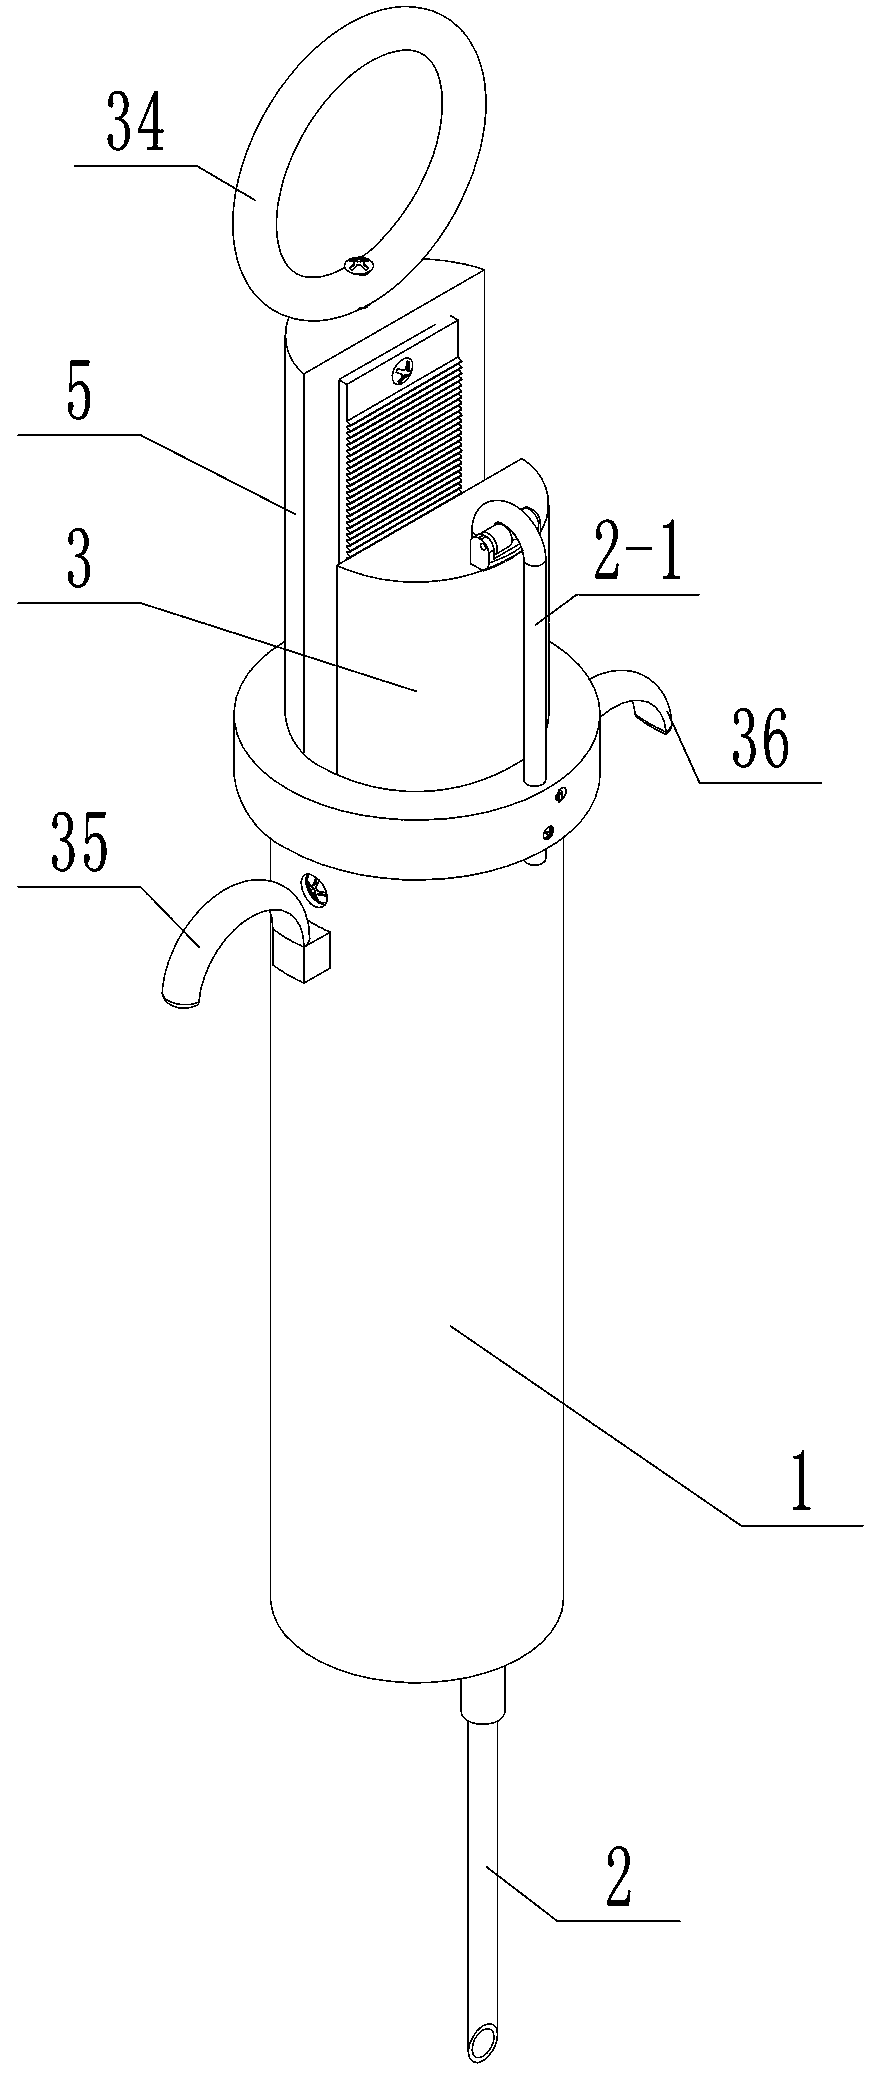 Device for needle core withdrawing together with vacuum suction in one-handed performance for puncture biopsy